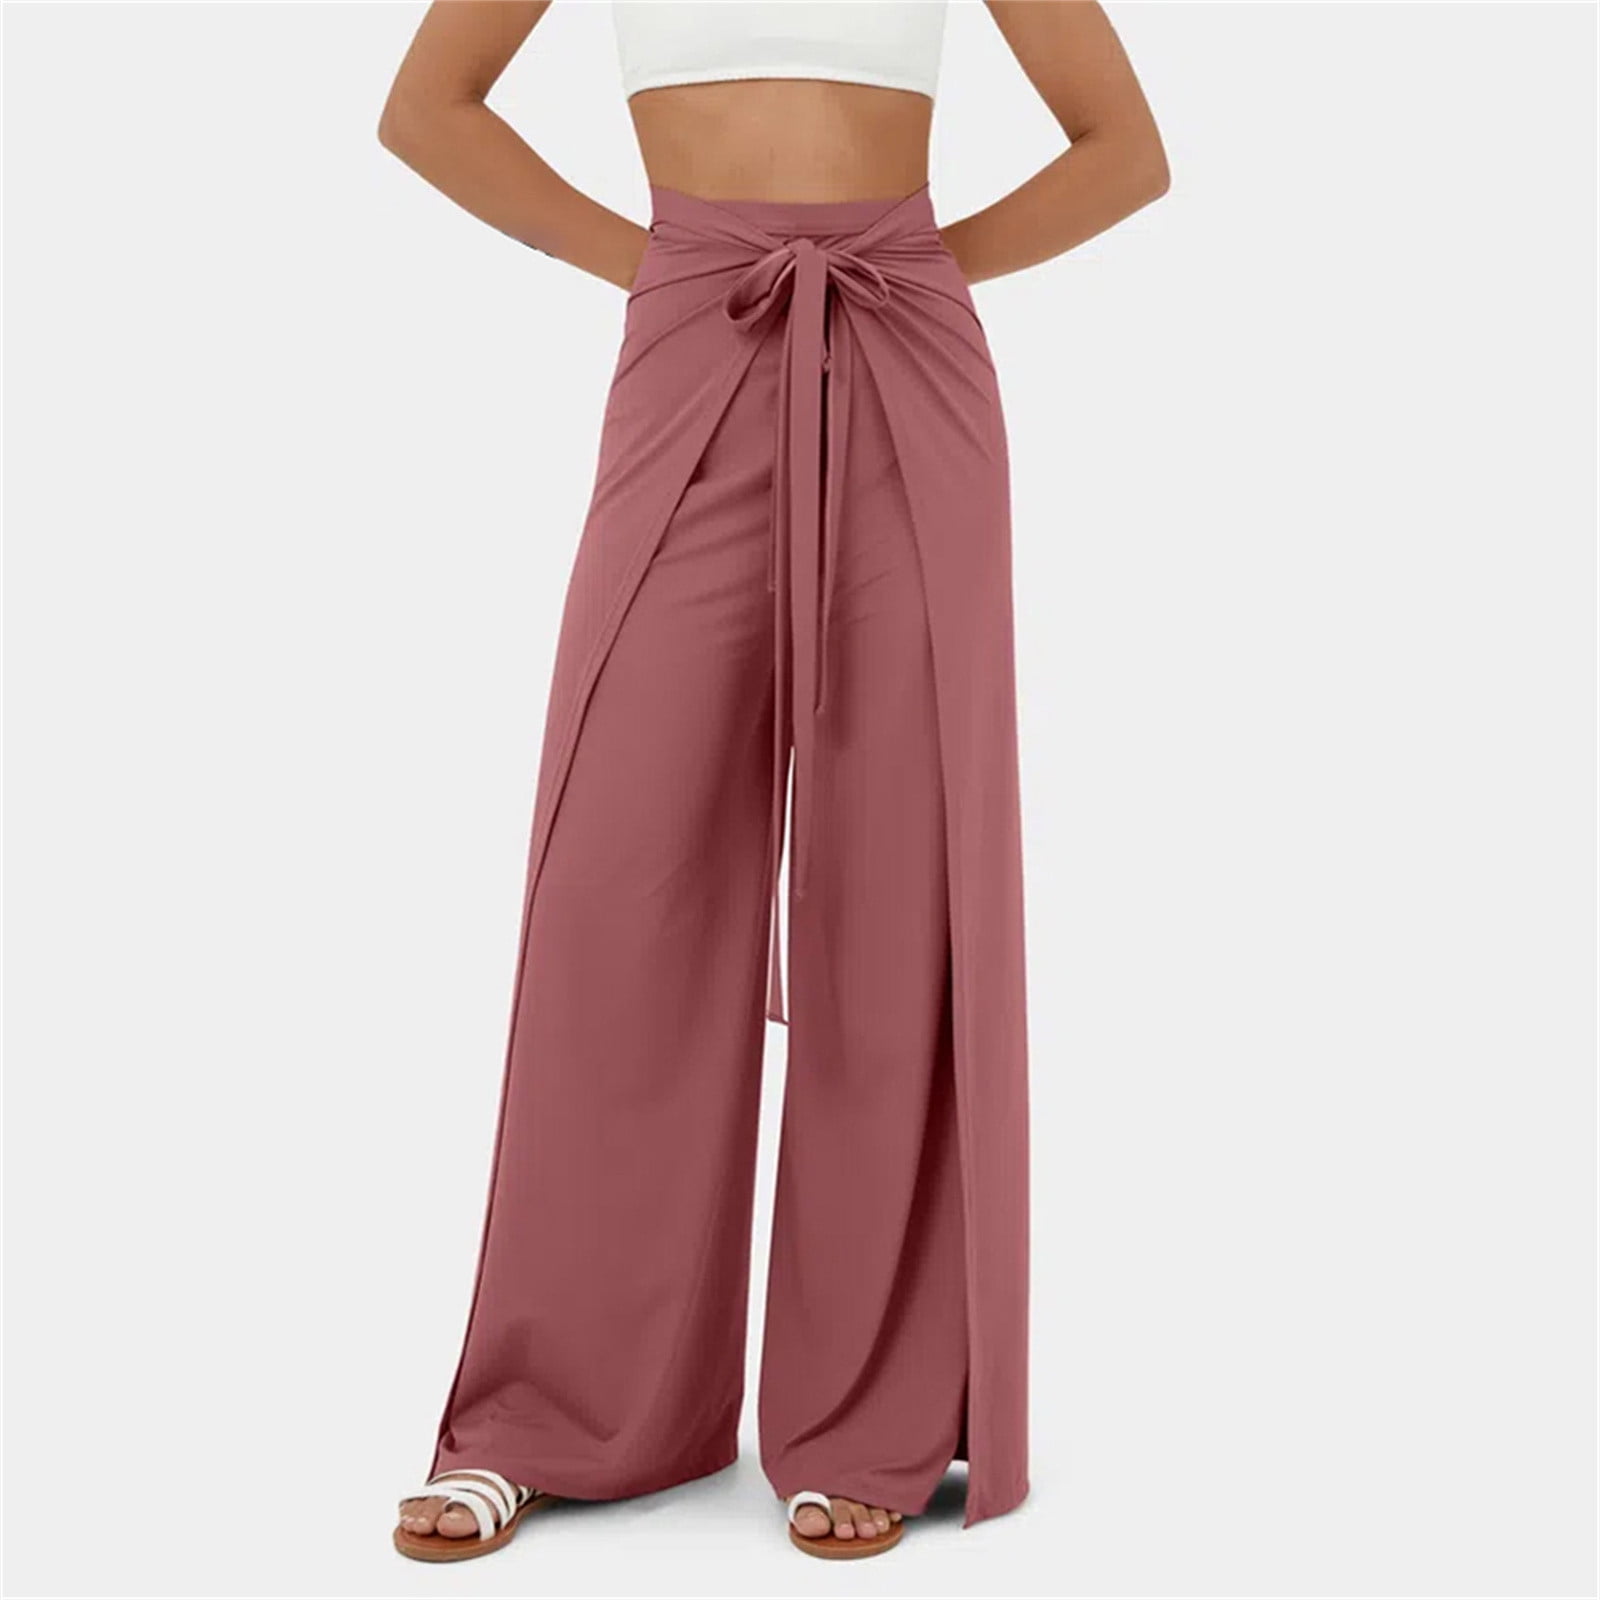 Ydkzymd Joggers Fall Pants for Women Loose Fit with Belt Slit Wide